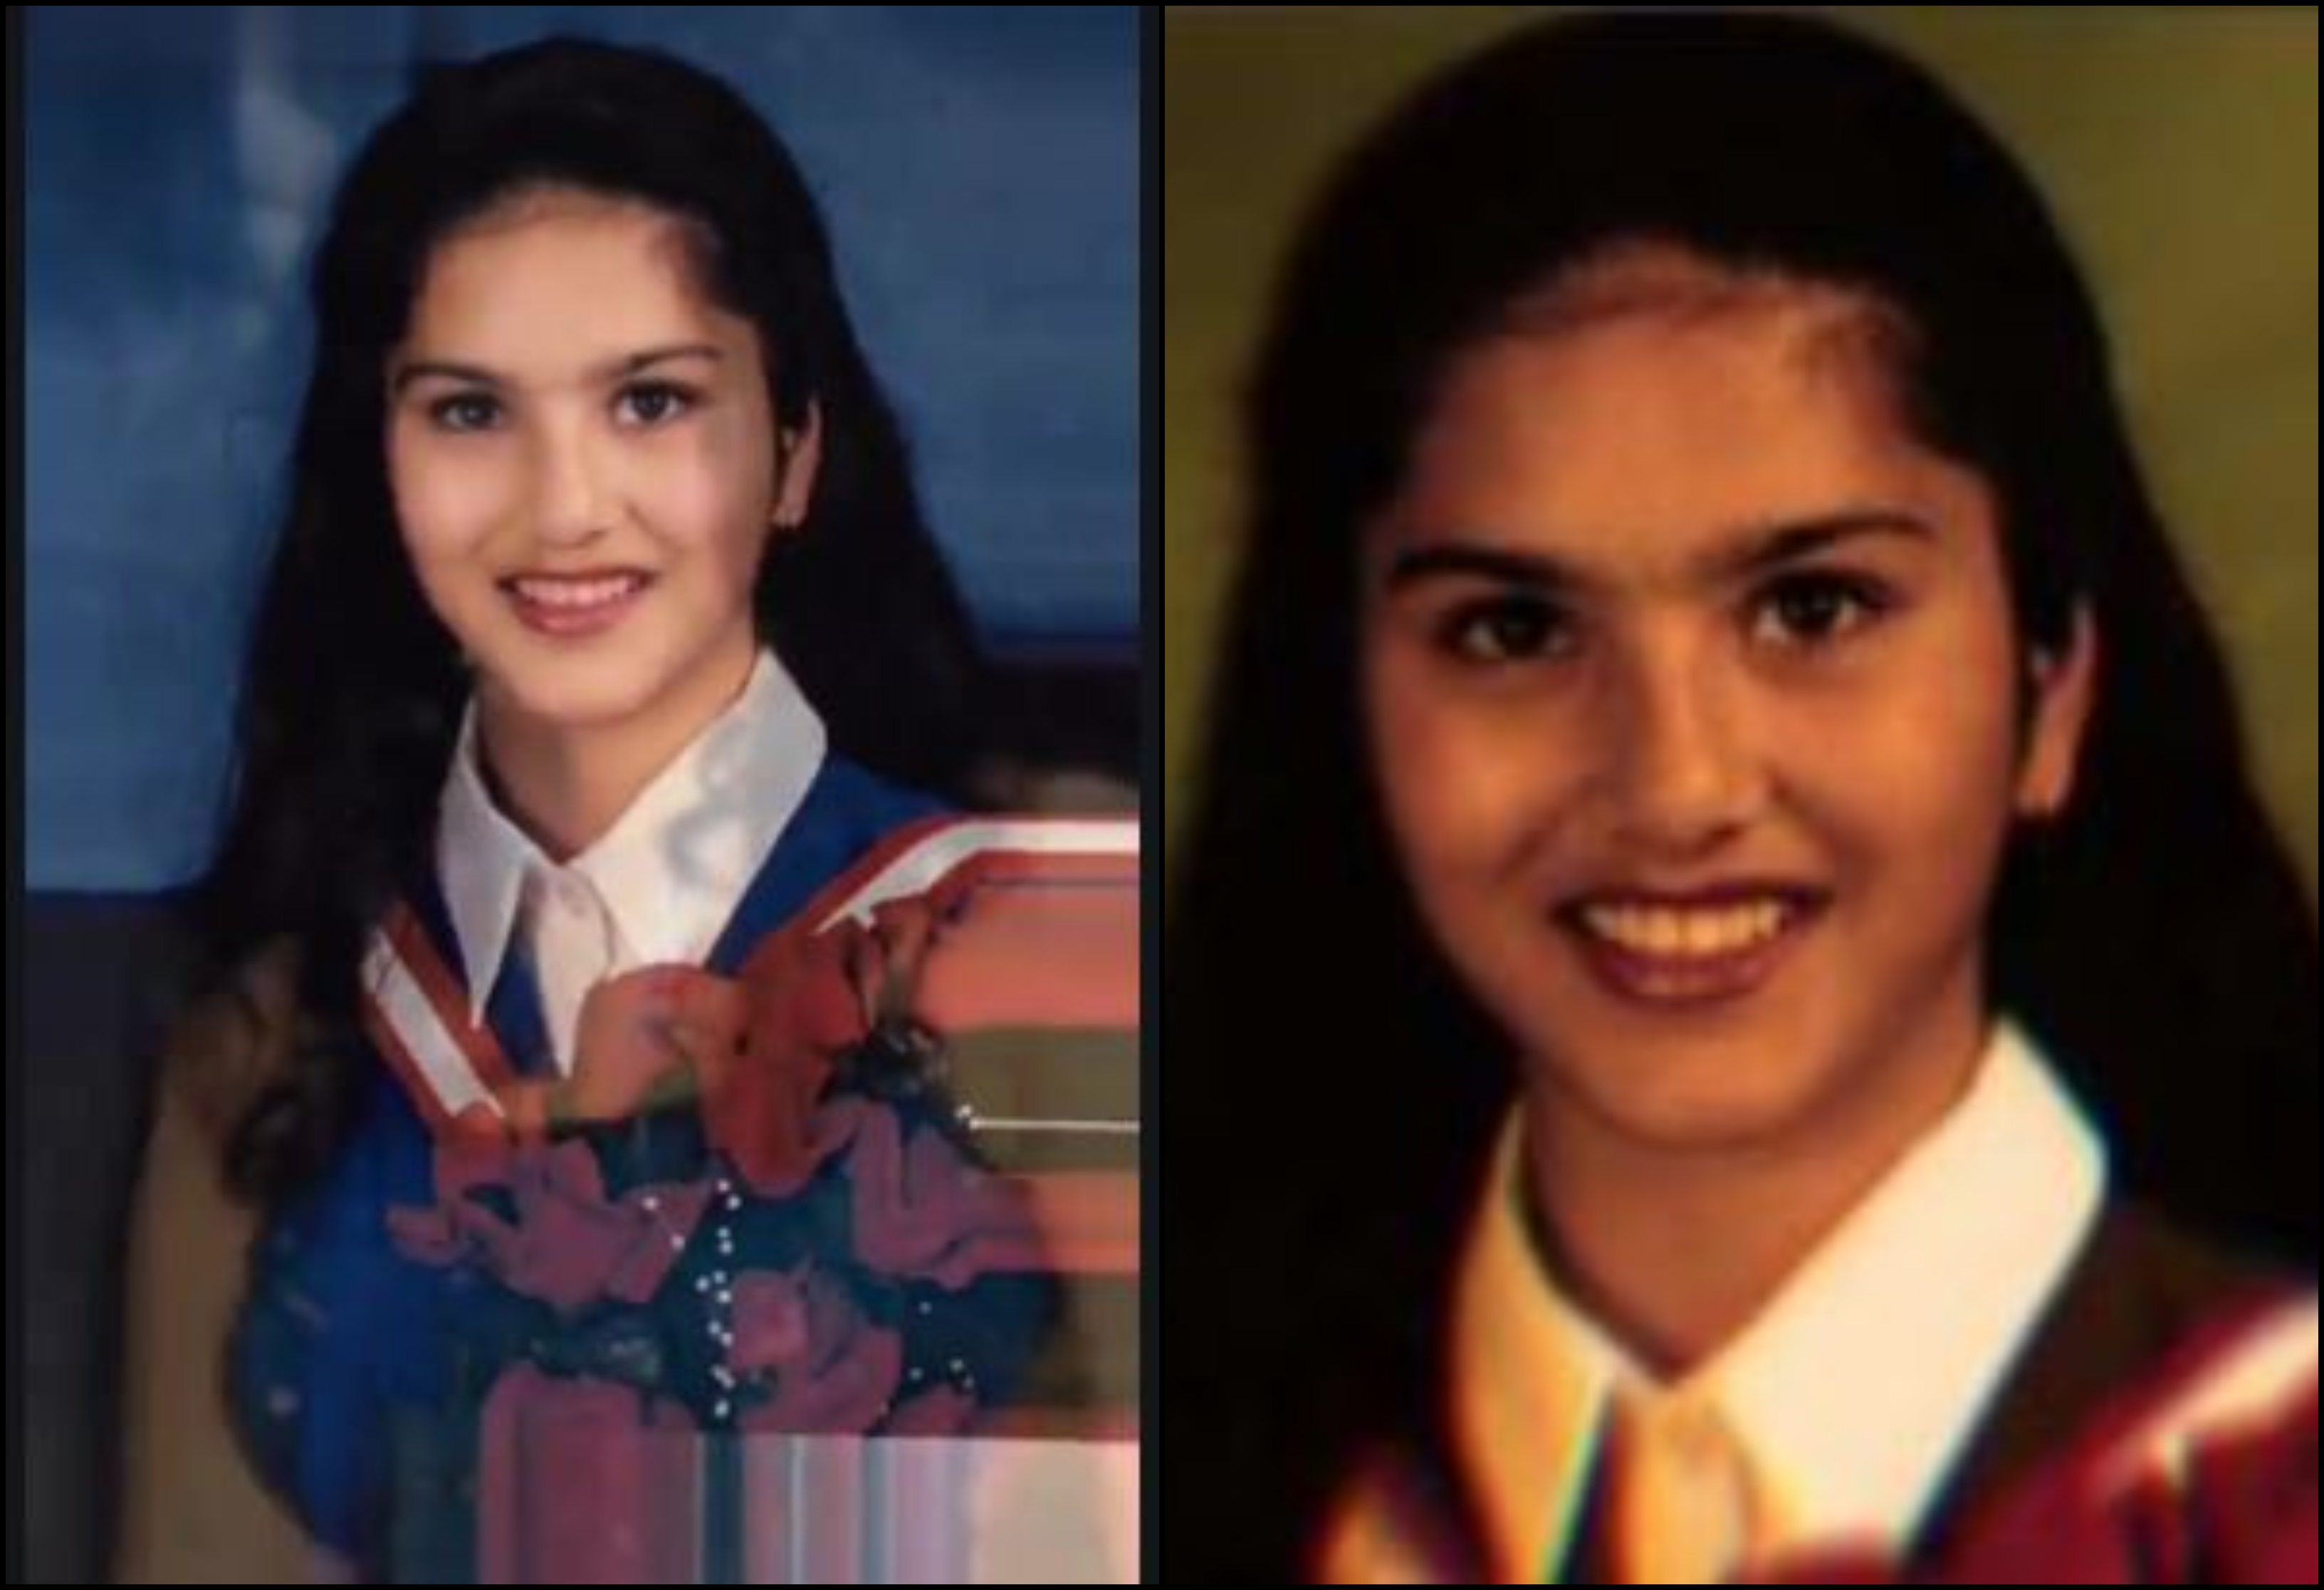 IN PICS: Sunny Leone looked nothing less than a doll, here's a few unseen pictures of her childhood